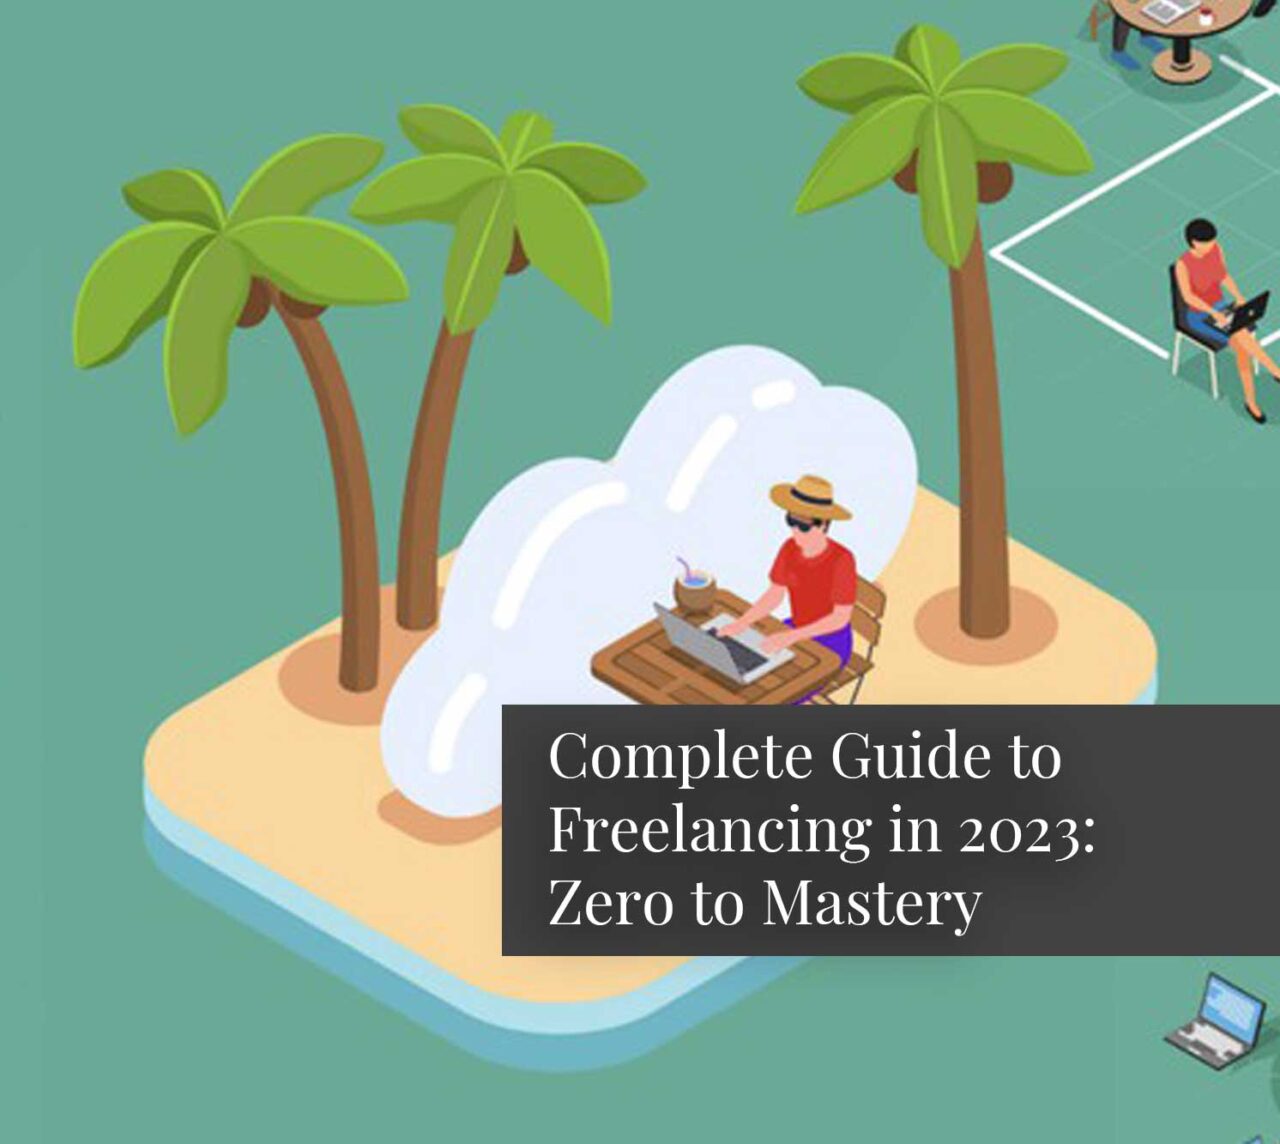 Complete Guide to Freelancing in 2023: Zero to Mastery